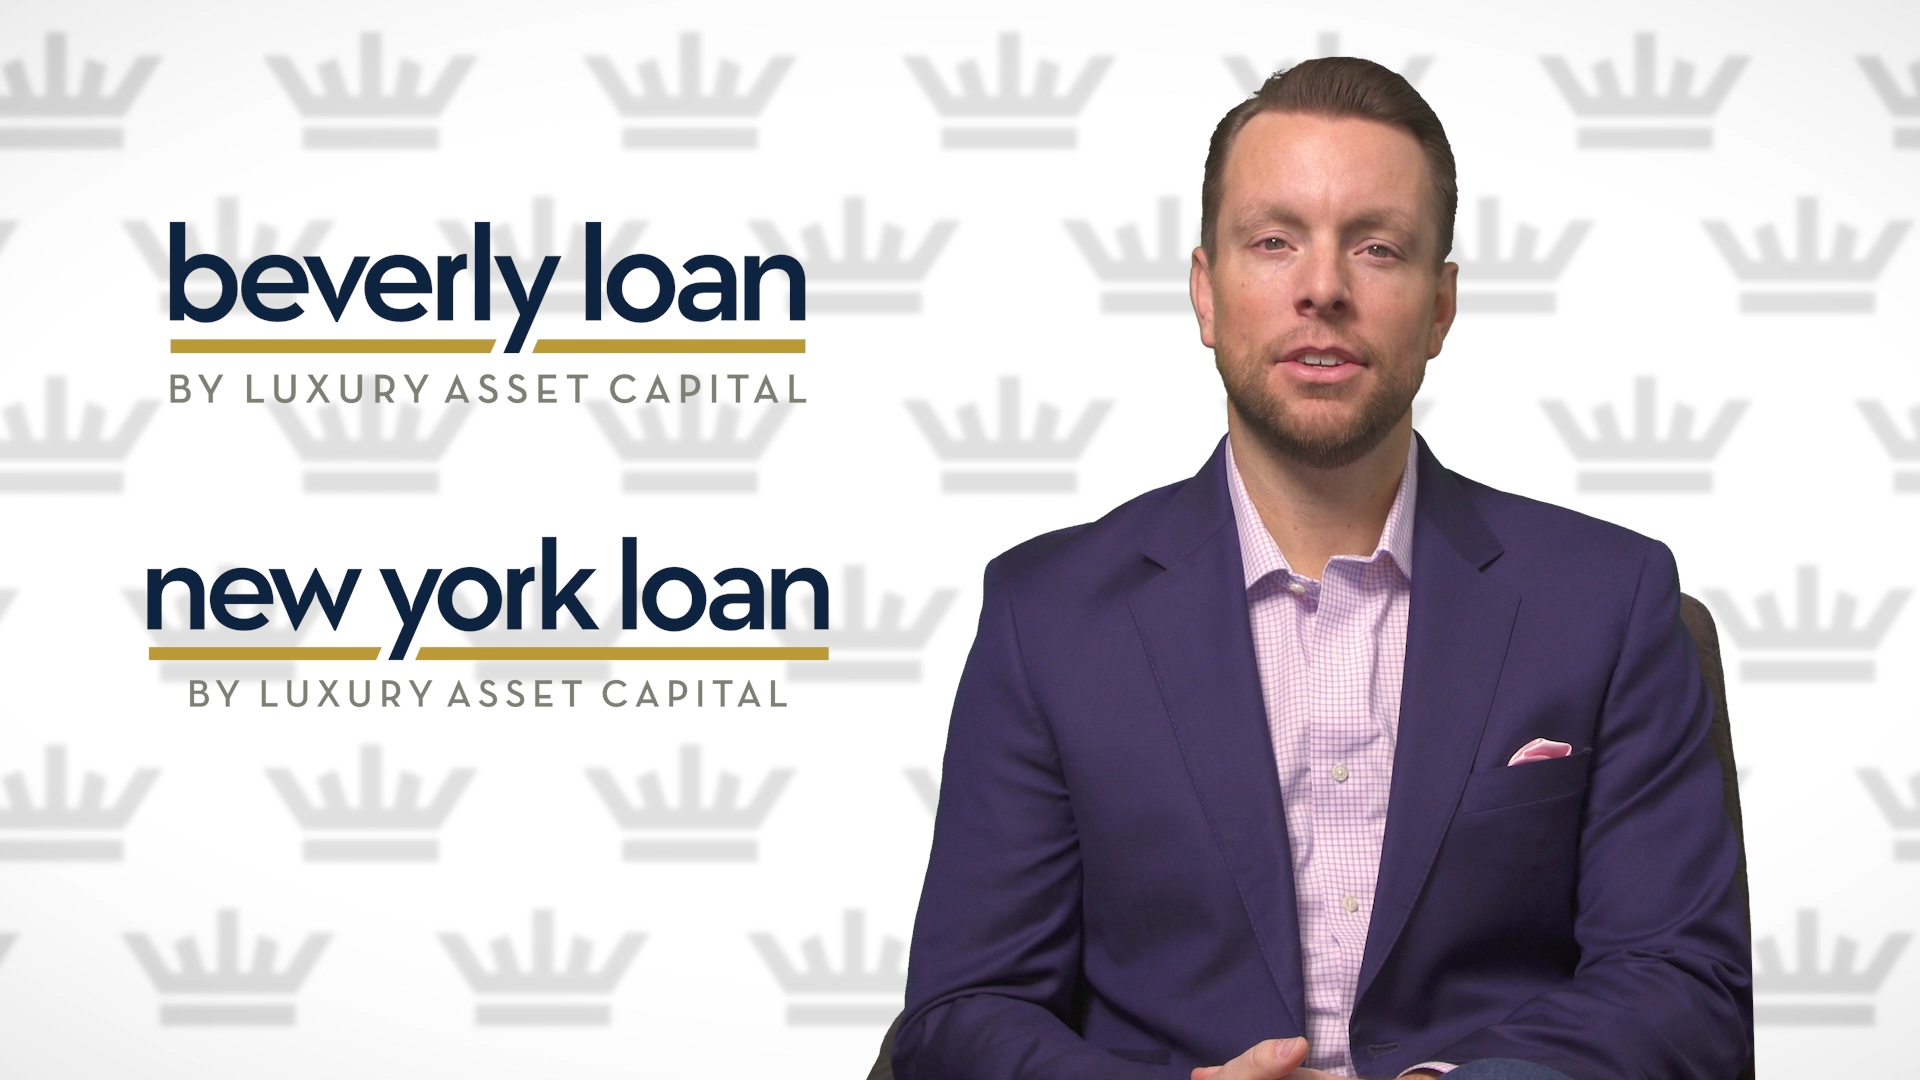 Luxury Asset Capital Founder and CEO Dewey Burke, and Chief Revenue Officer Katelyn Conlon comment on the acquisition of Beverly Loan Company and New York Loan Company by Luxury Asset Capital. The acquisition of these prominent collateral lending brands solidifies Luxury Asset Capital’s position as the nation’s largest privately-held provider of non-bank loans that use borrowers’ luxury assets as collateral. The combination of the newly acquired brands with the company’s existing Borro brand has loaned over one billion dollars to tens of thousands of clients across the country.